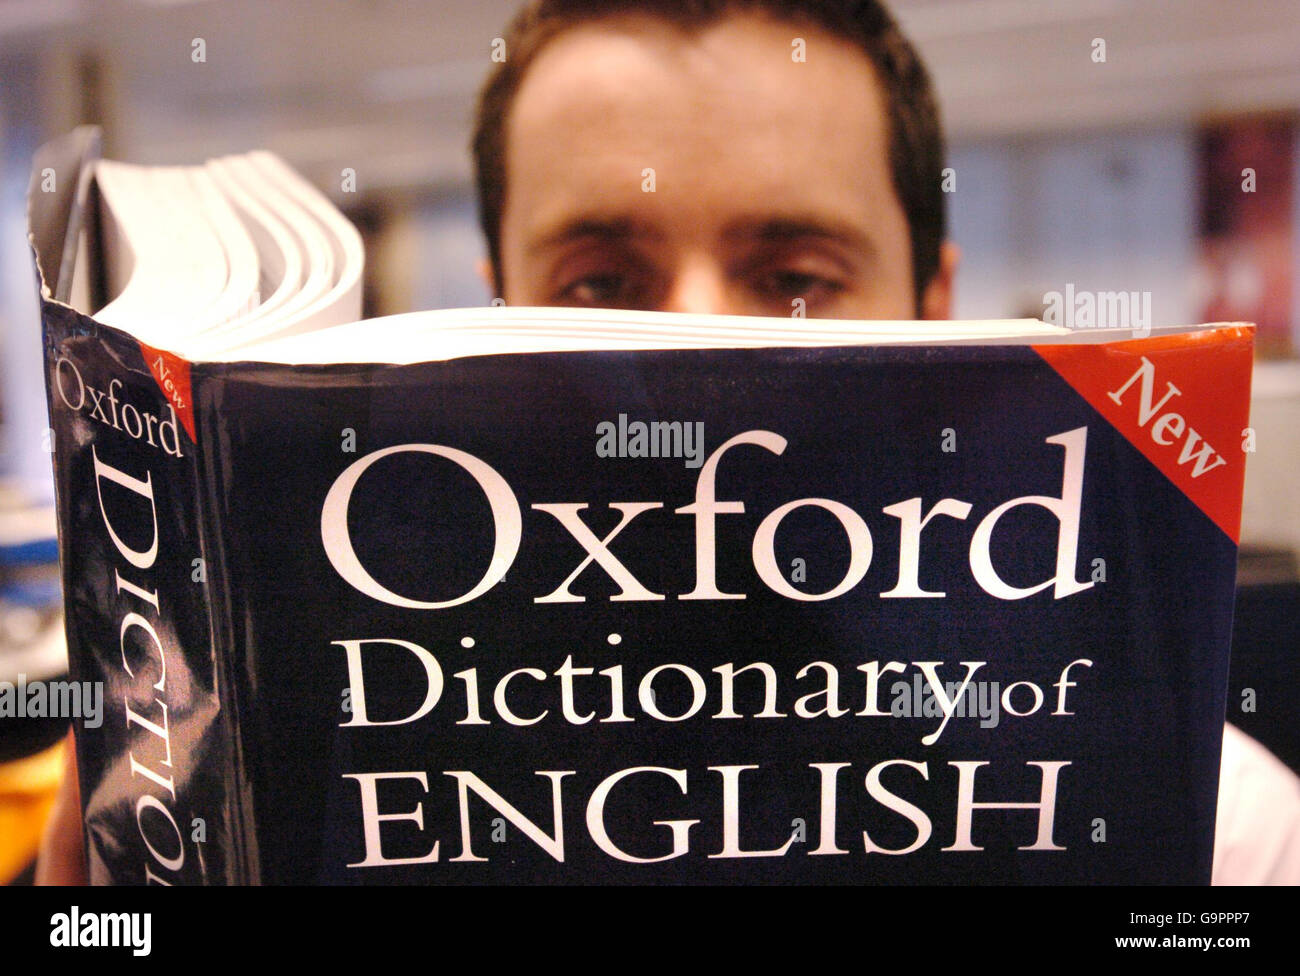 Ditch the dictionary, say English language campaigners Stock Photo